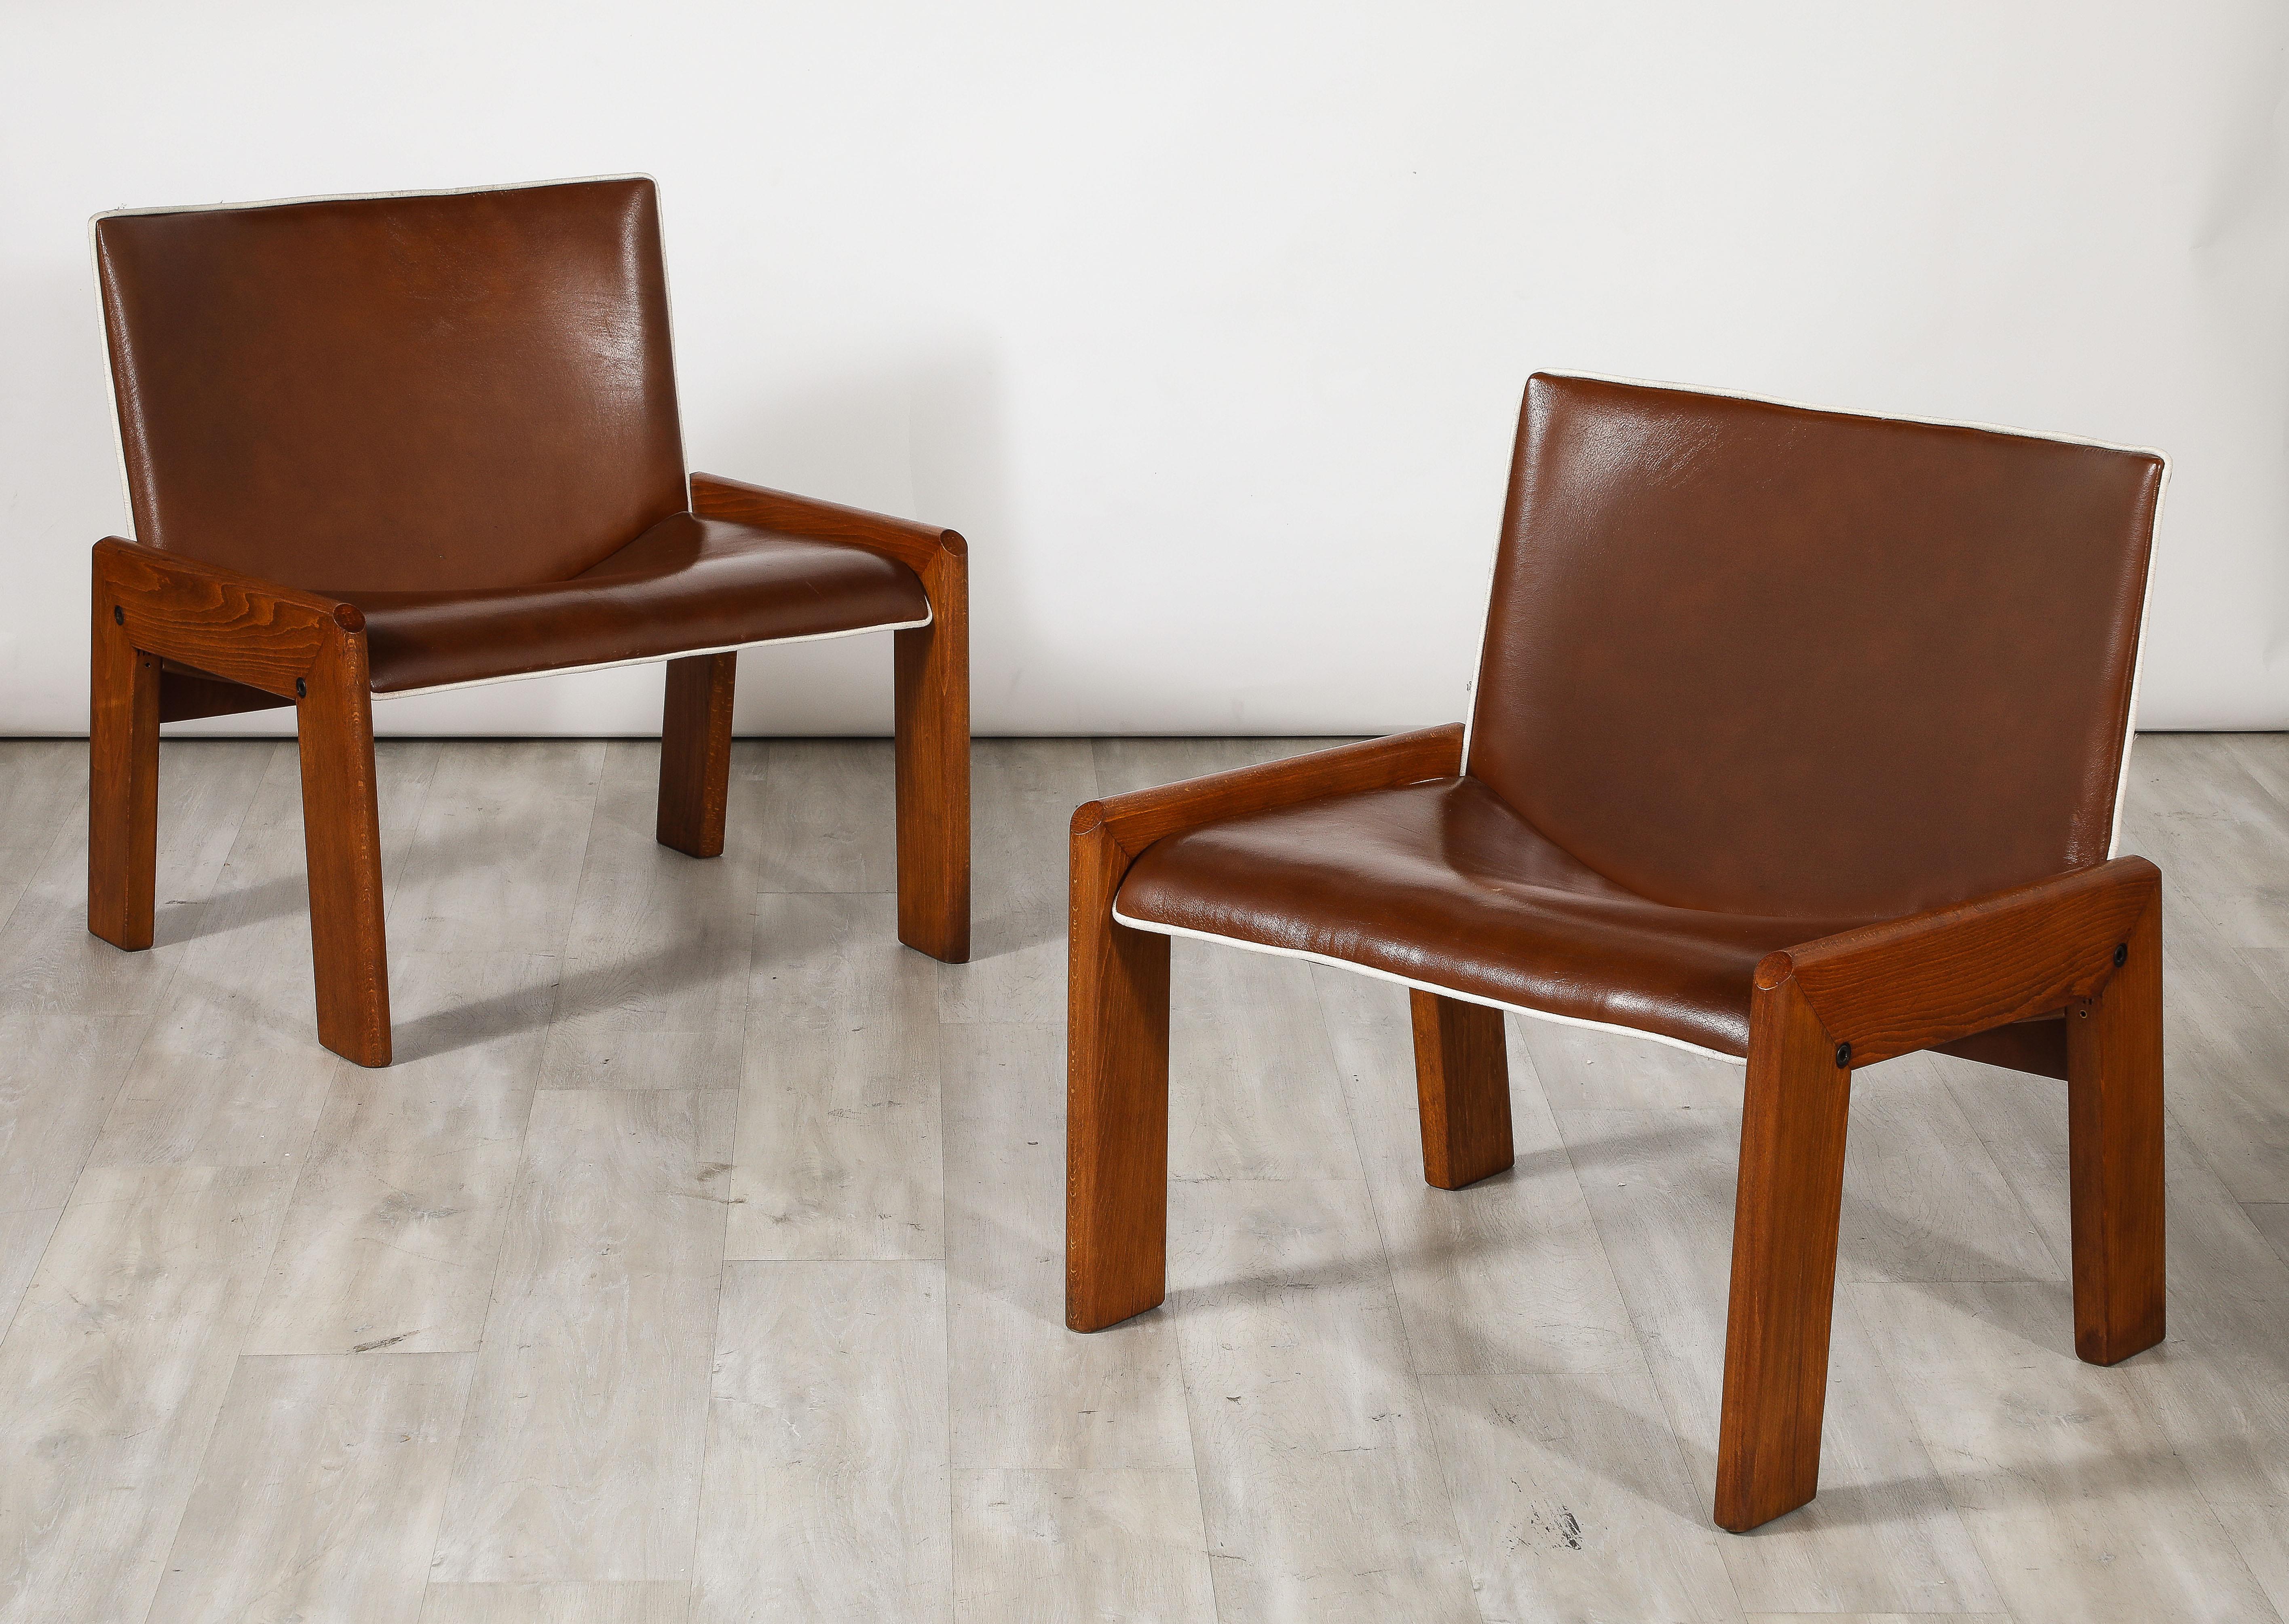 A chic pair of walnut side chairs by B&T Gruppo Industriale Salotti. The wide chocolate brown leather seats and backs with crisp white leather piping are supported on angular and sturdy walnut legs.  Very comfortable and wonderful modernist design.